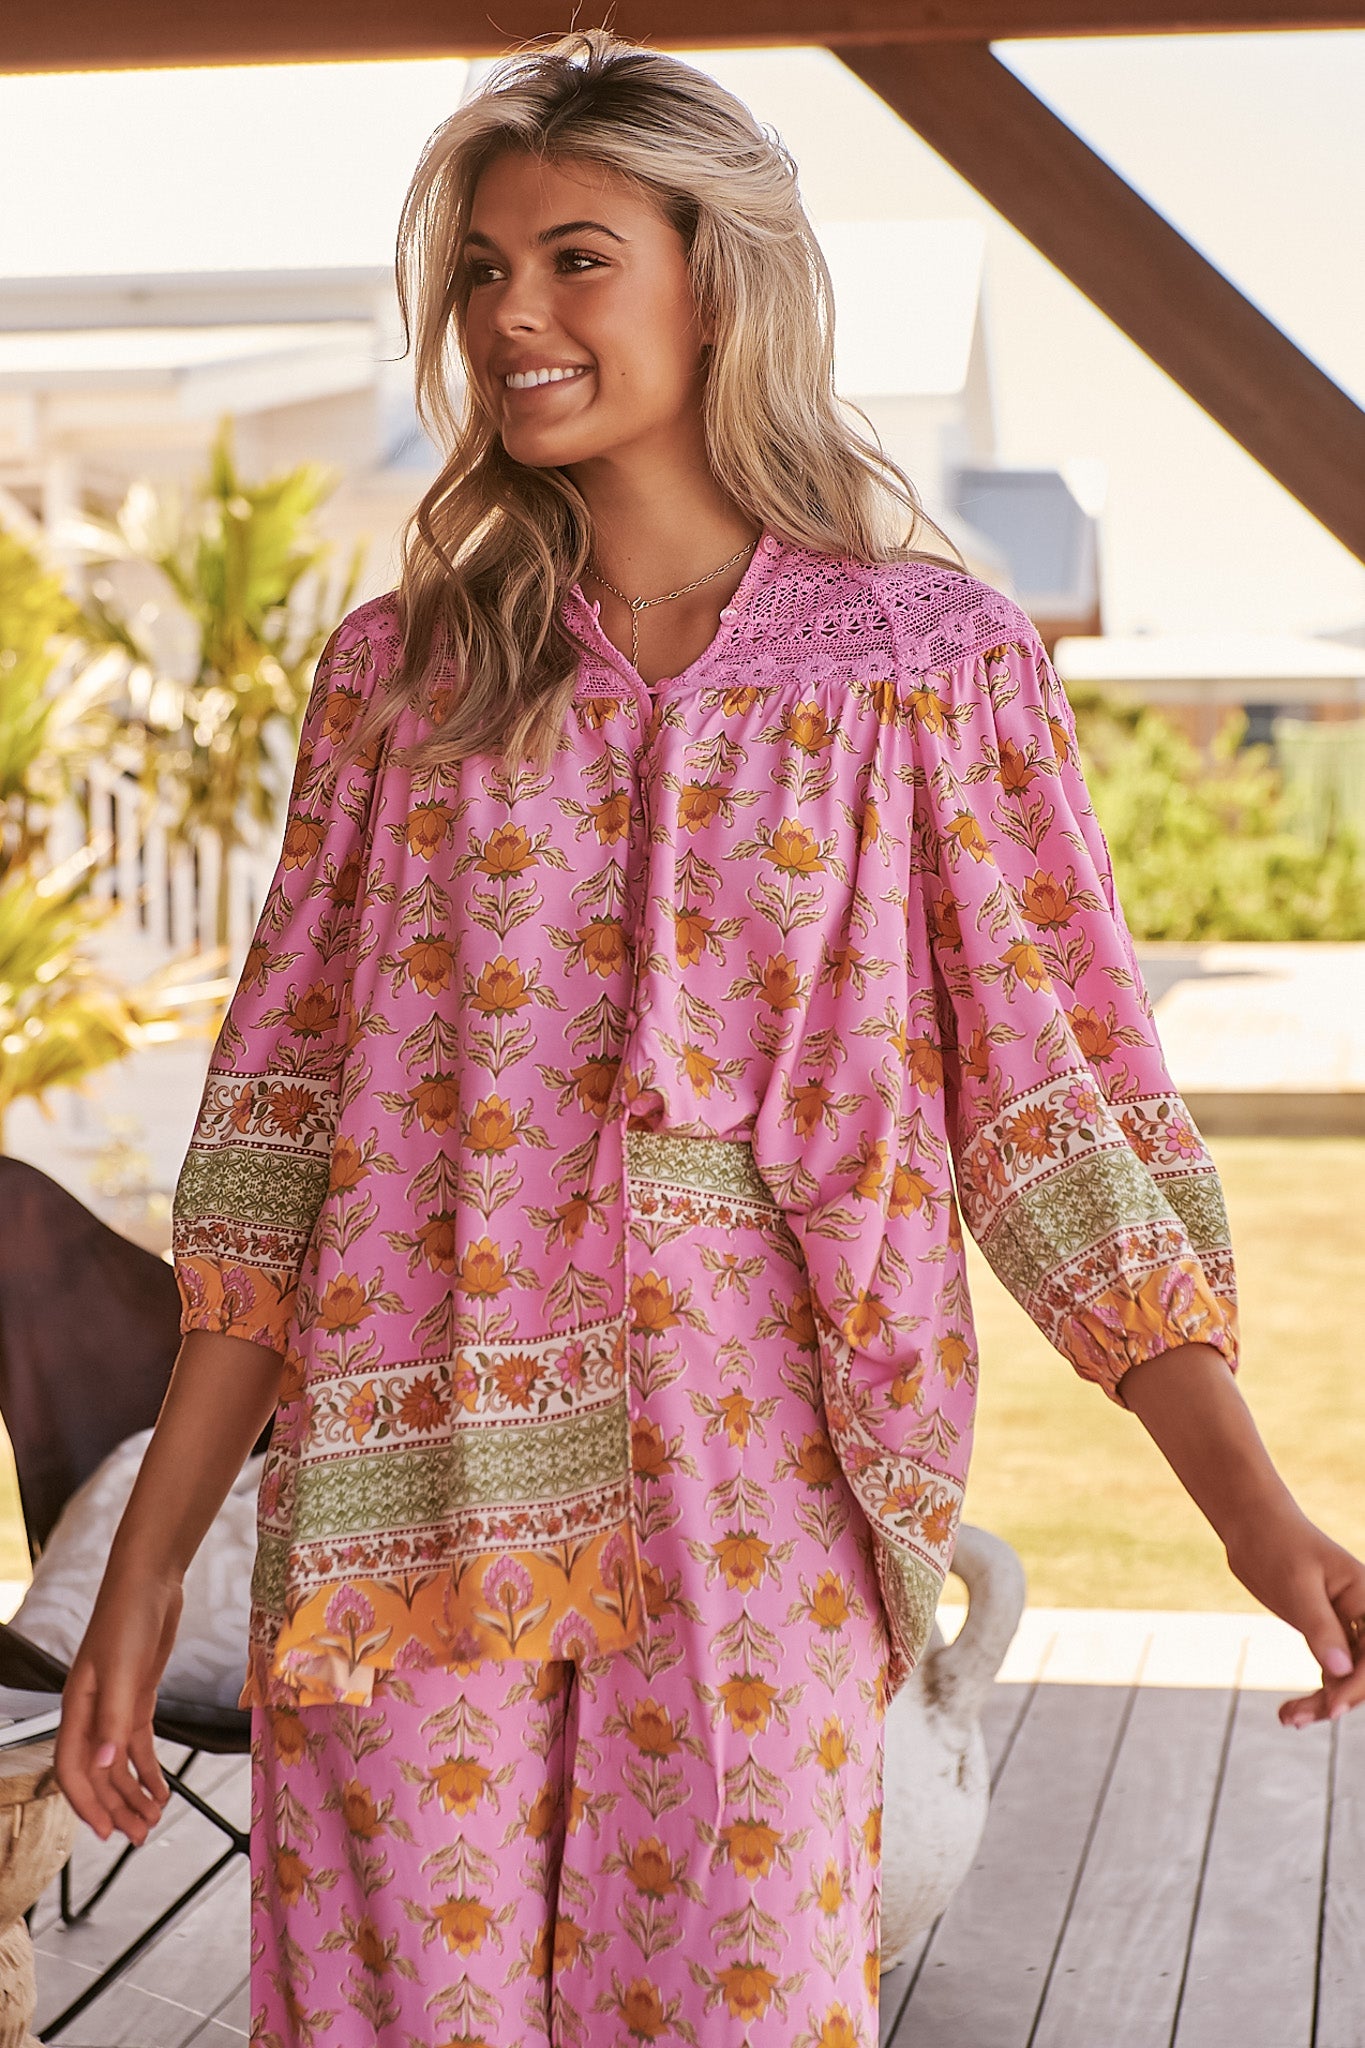 JAASE - Florence Blouse: Lace Shoulders Button Down Blouse in Blushing Meadow Print